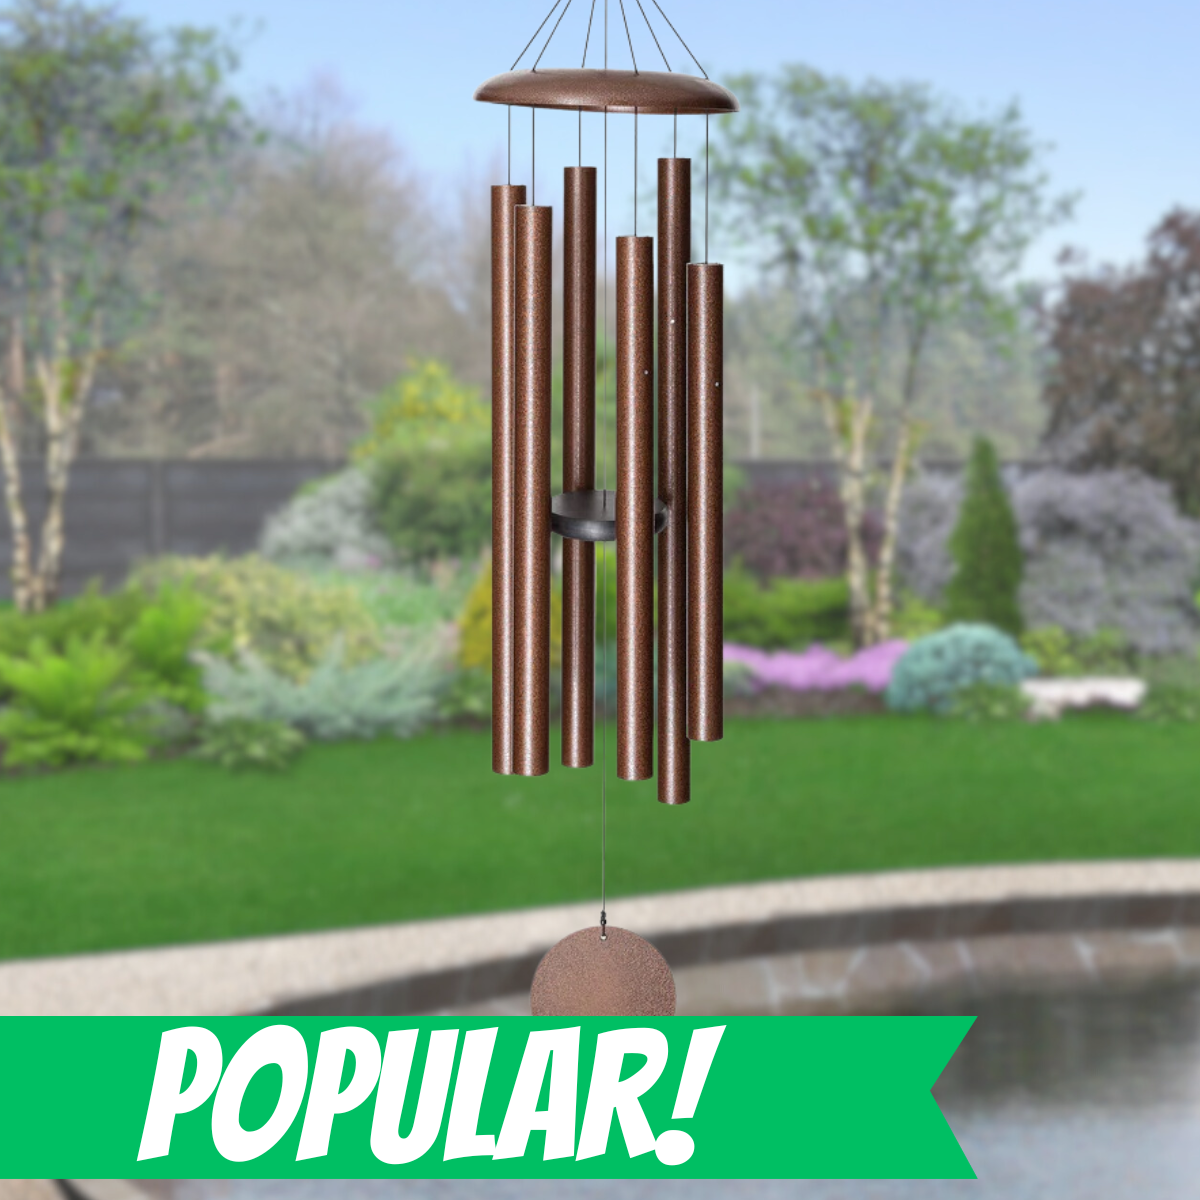 CORINTHIAN BELLS 56 INCH COPPER VEIN WIND CHIME - SCALE OF G